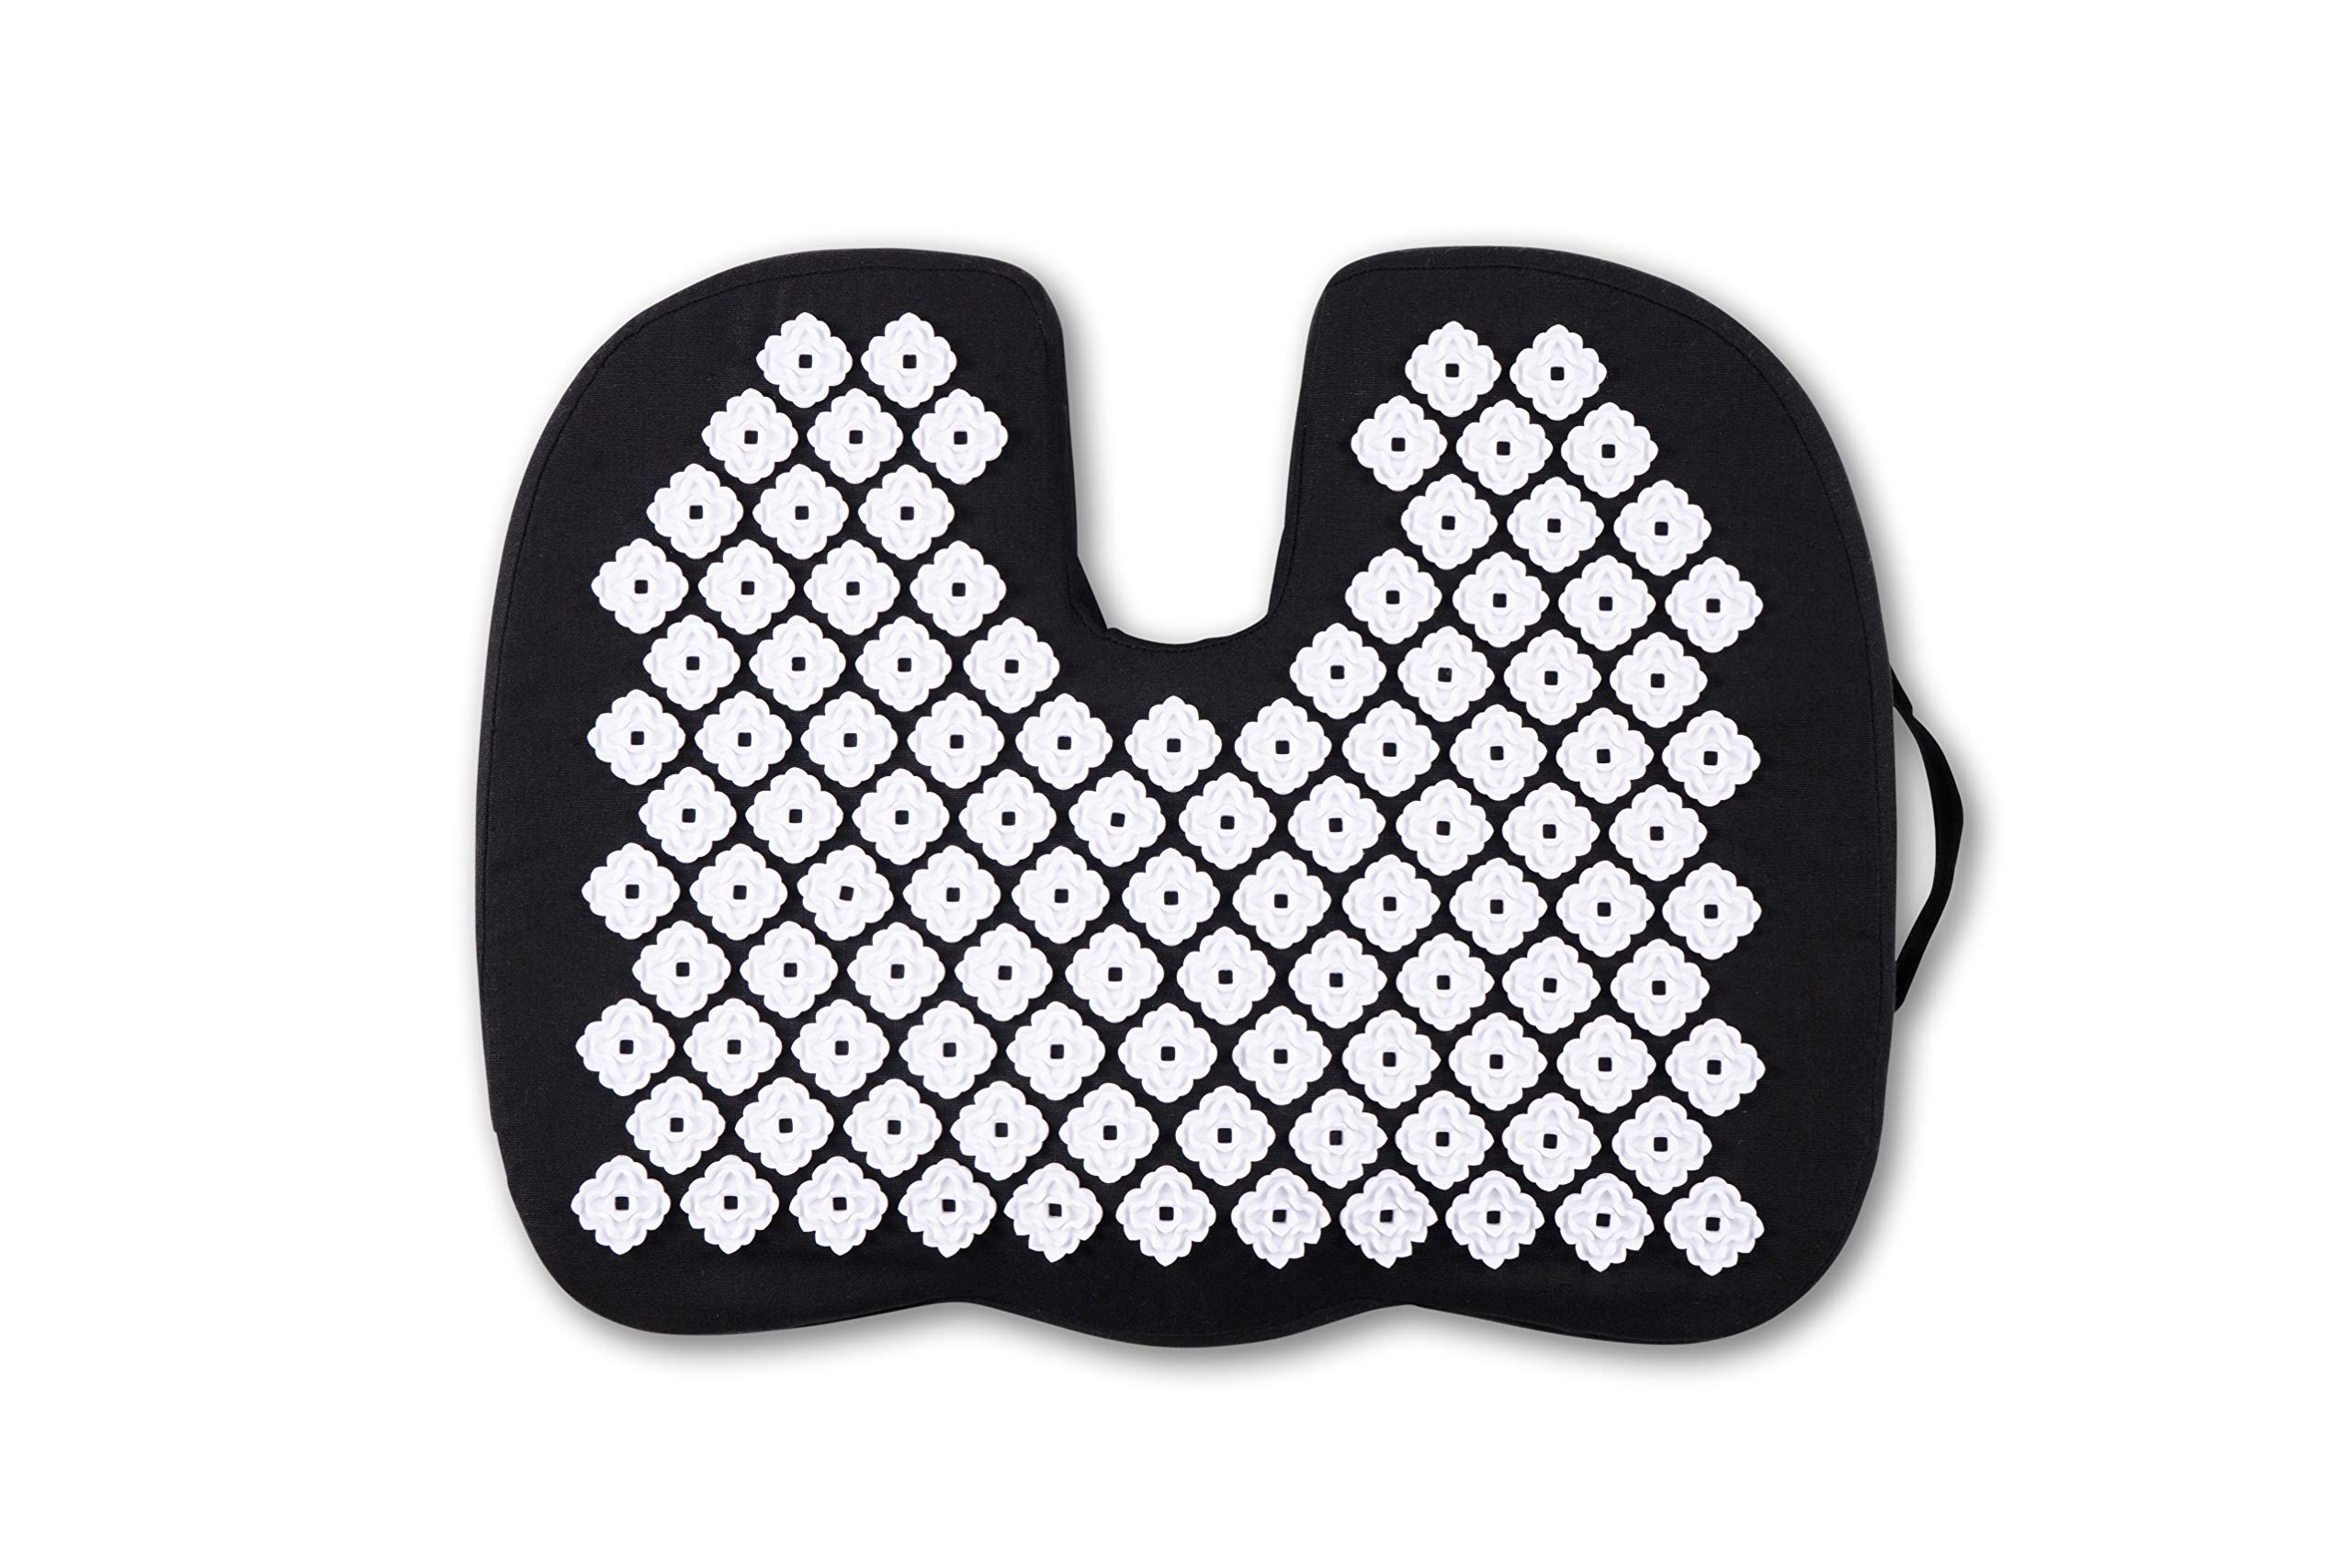  Seat Cushion for Tailbone Pain Relief, Pressure